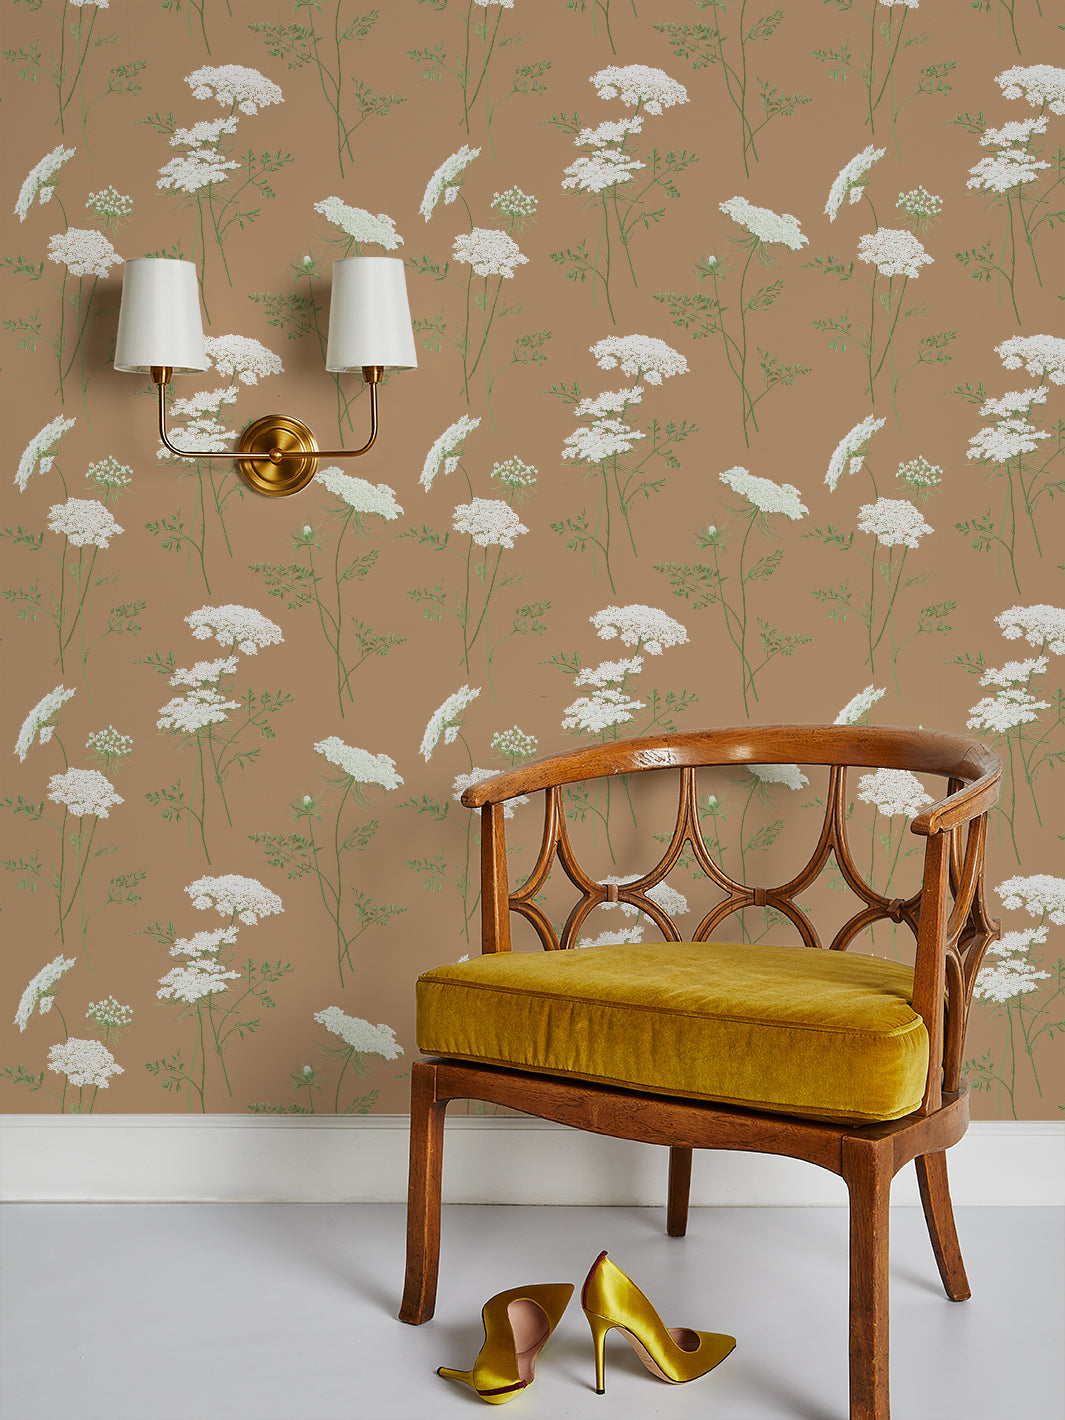 'The Queen's Lace' Wallpaper by Sarah Jessica Parker - Pecan